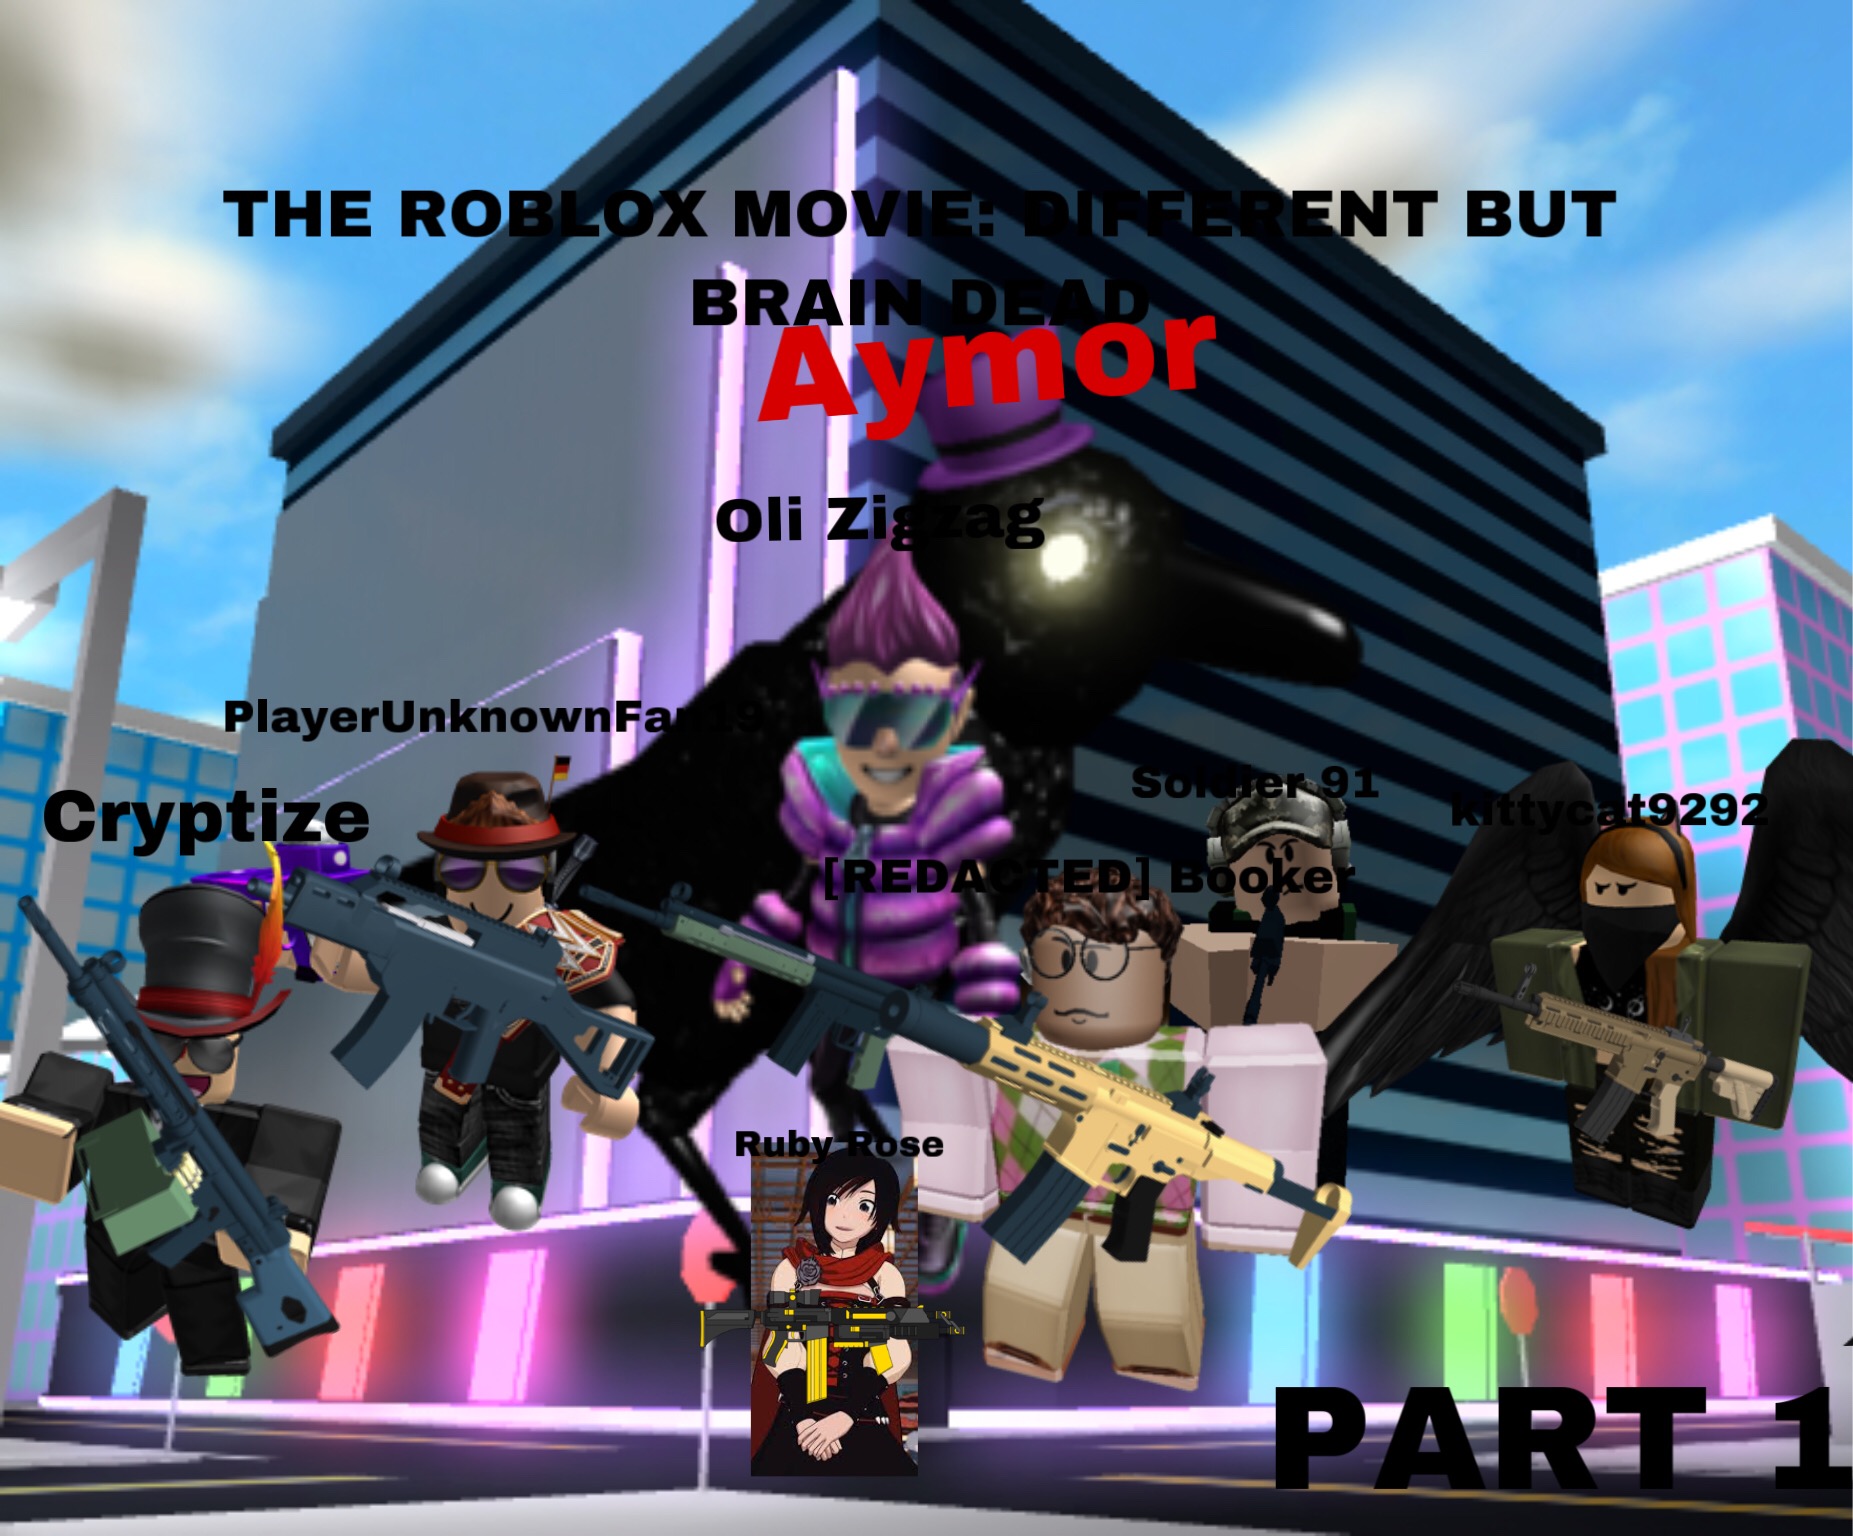 The Roblox Movie Different But Brain Dead The Roblox Movie Wiki Fandom - the roblox movie glitched in time the roblox movie wiki fandom